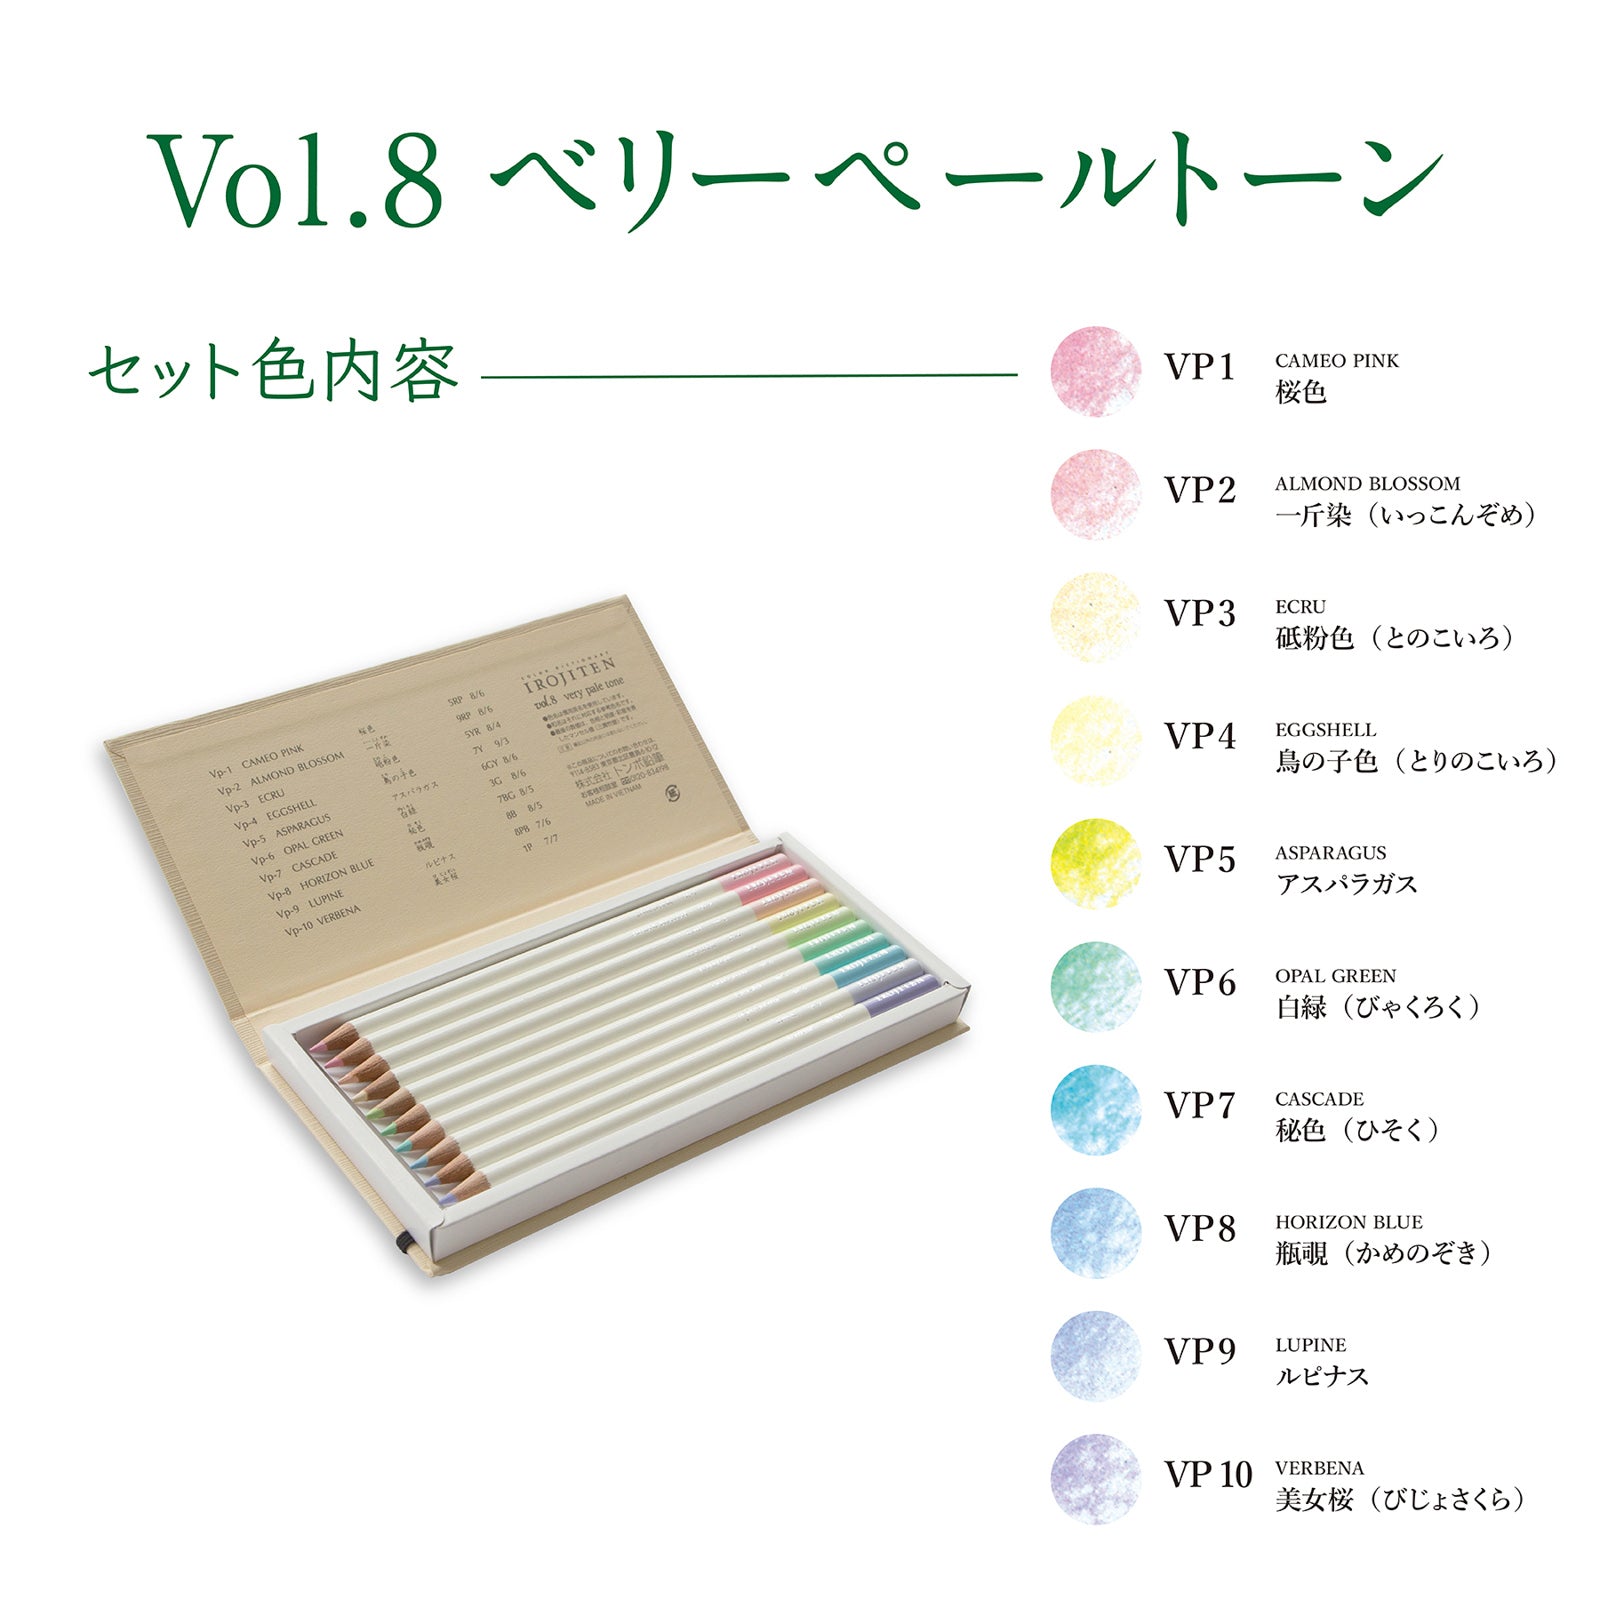 Tombow Irojiten set volume 8: Very pale tone lll10 colors